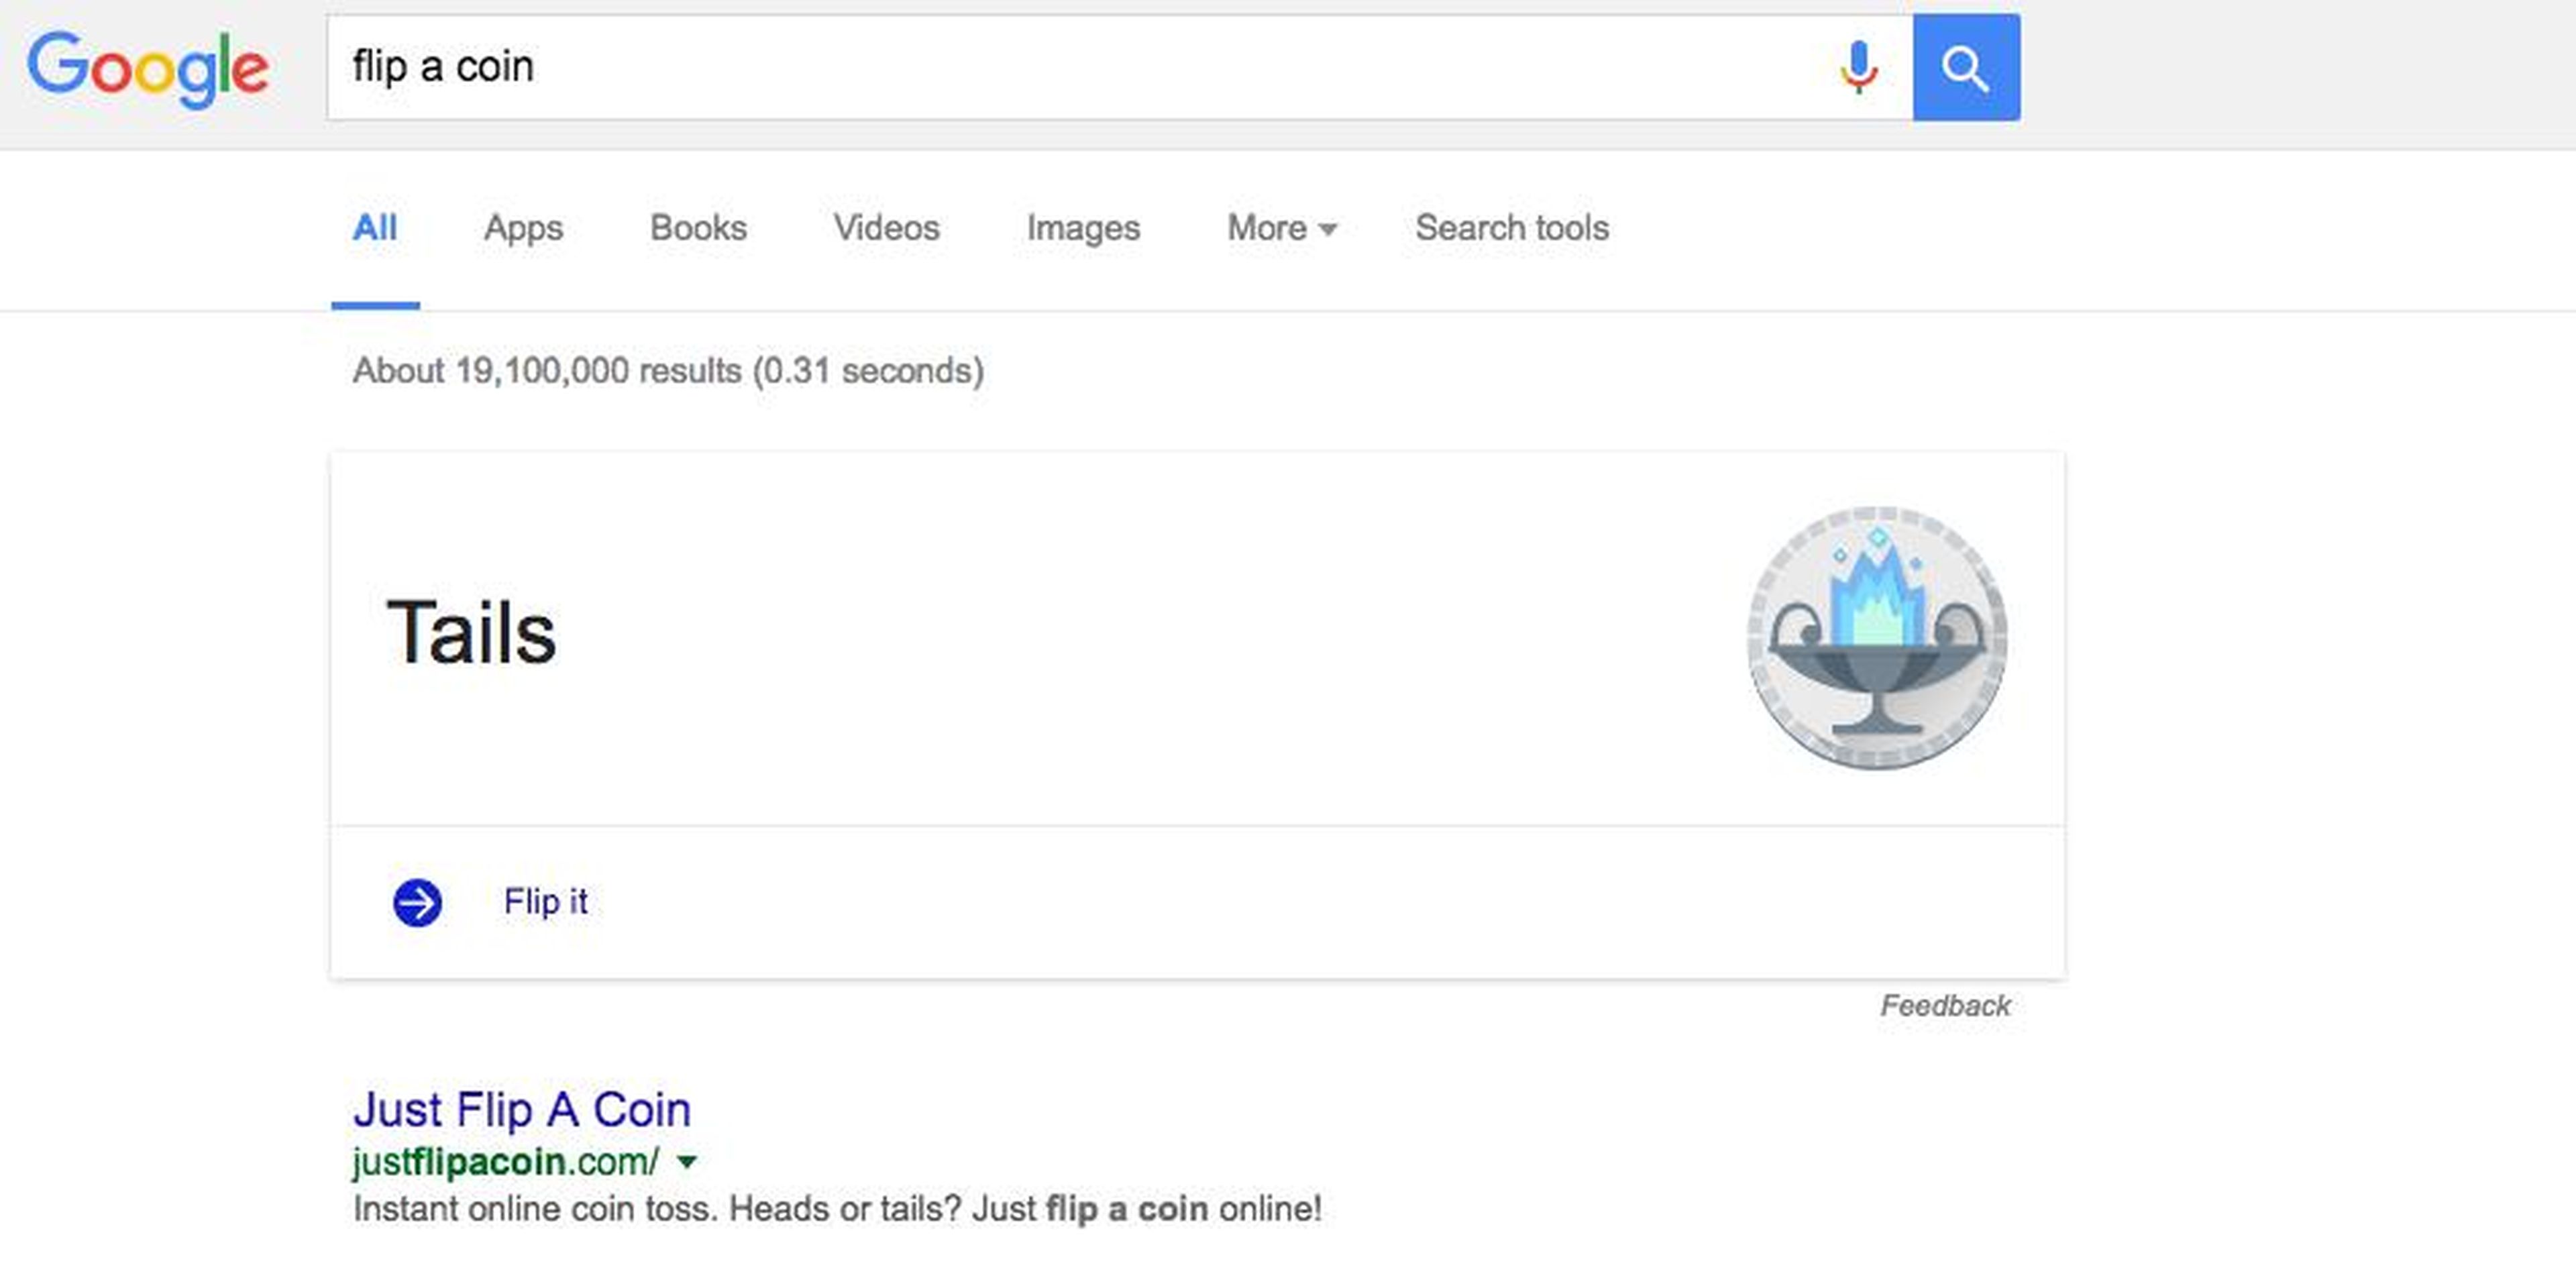 4. If you have a tough decision on your hands, Googling “flip a coin” might help.